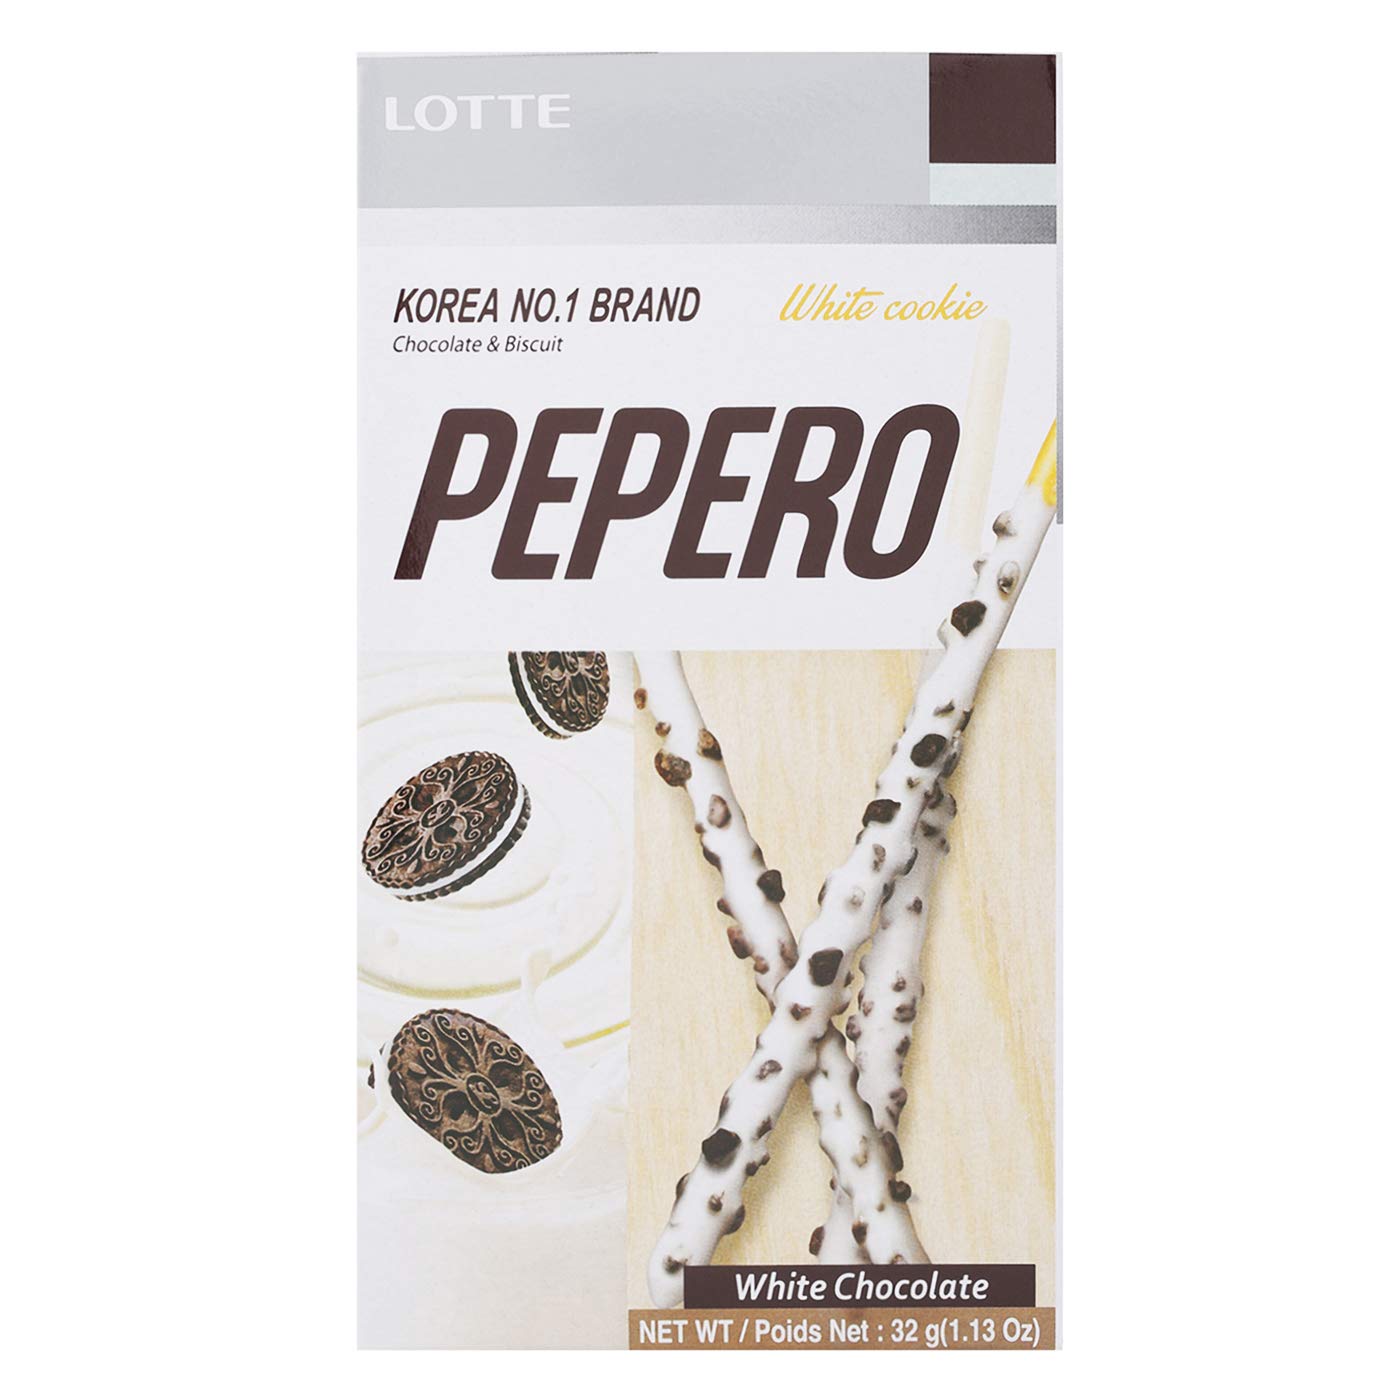 Lotte White Chocolate Cookie Peperro Biscuits 32g. pack 4